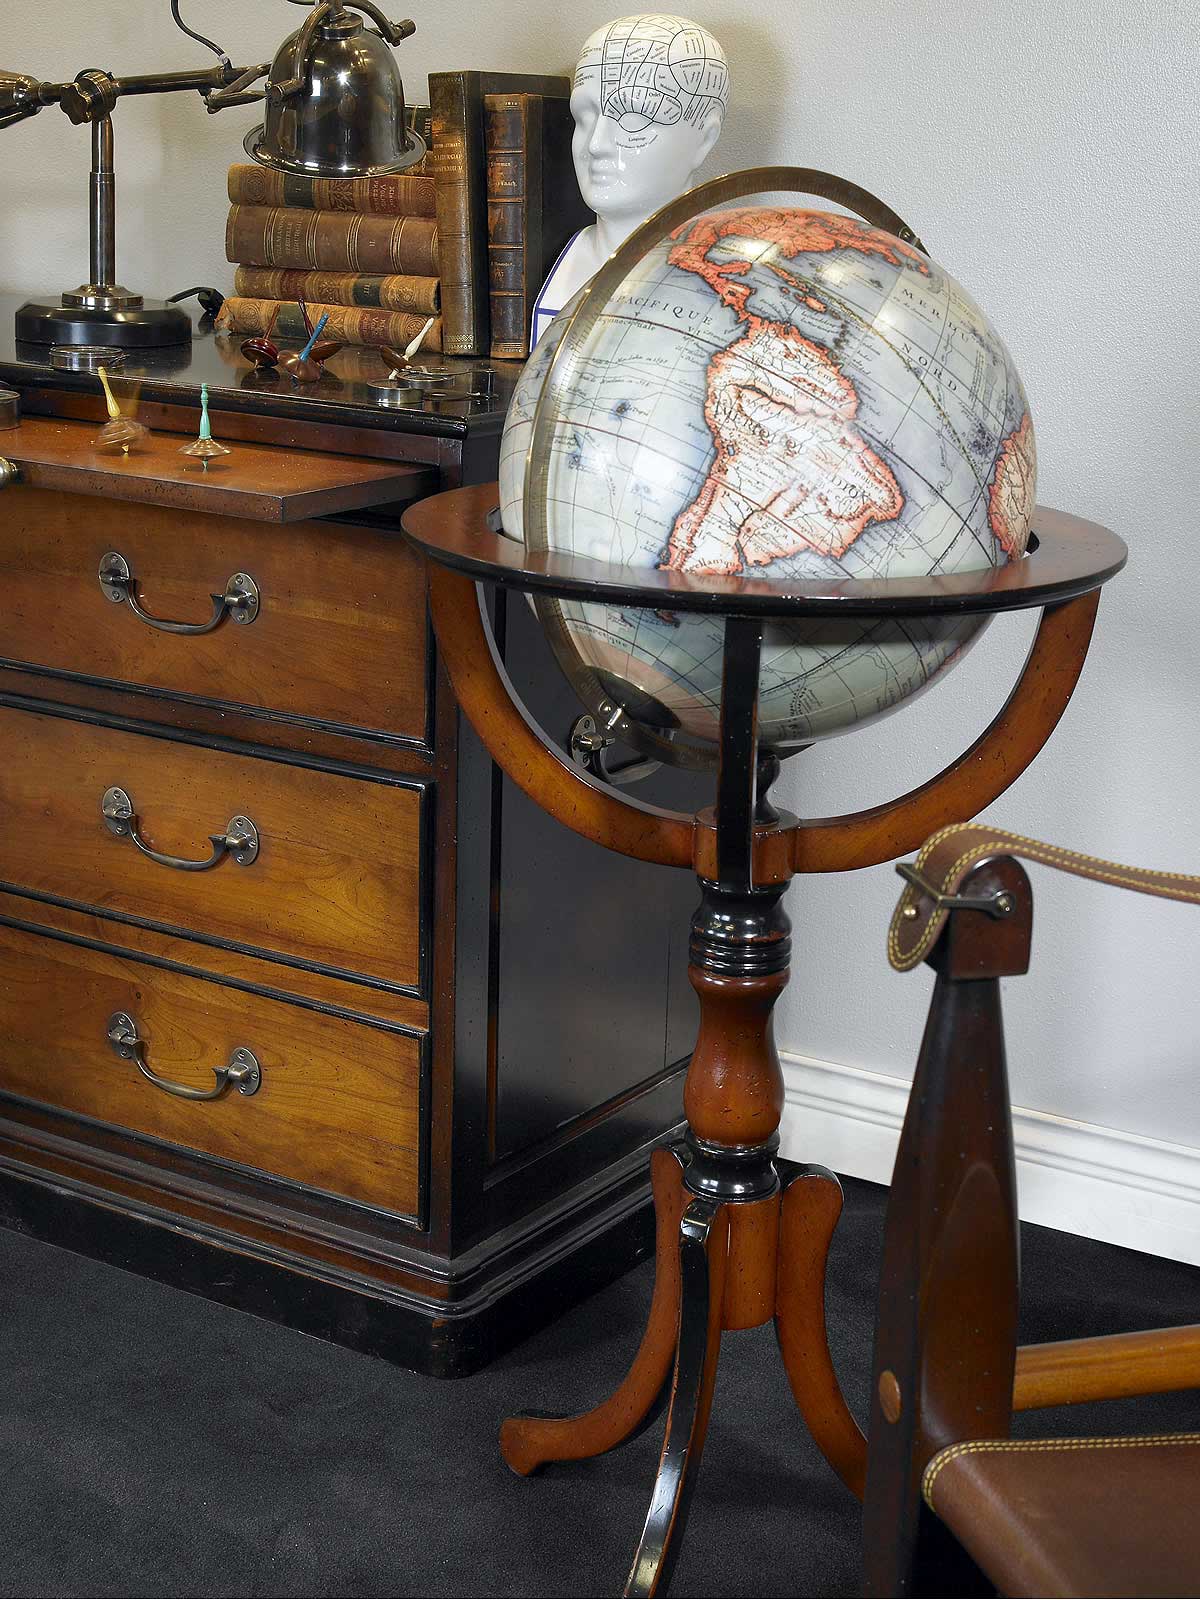 Antique Library Globe (reproduction) or old globe or historical globe